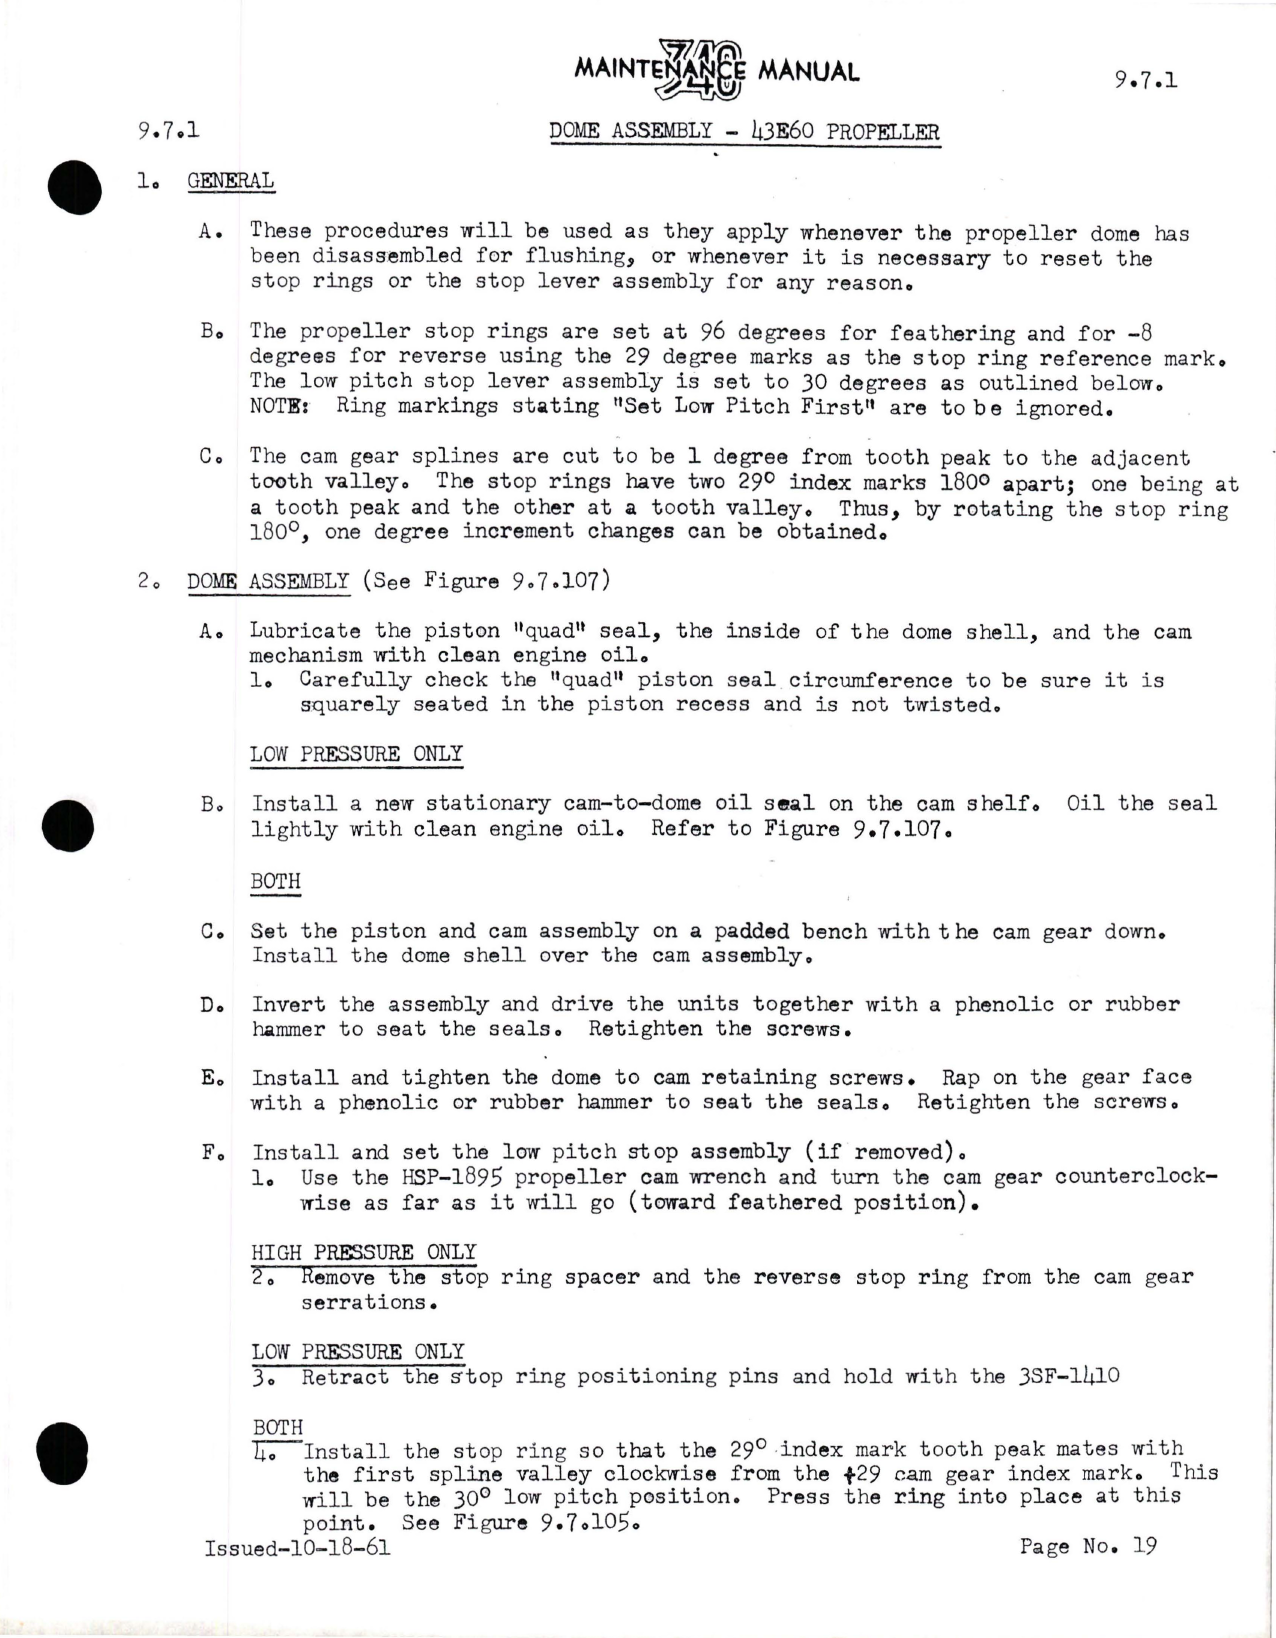 Sample page 7 from AirCorps Library document: Maintenance Manual for 43E60 Propeller